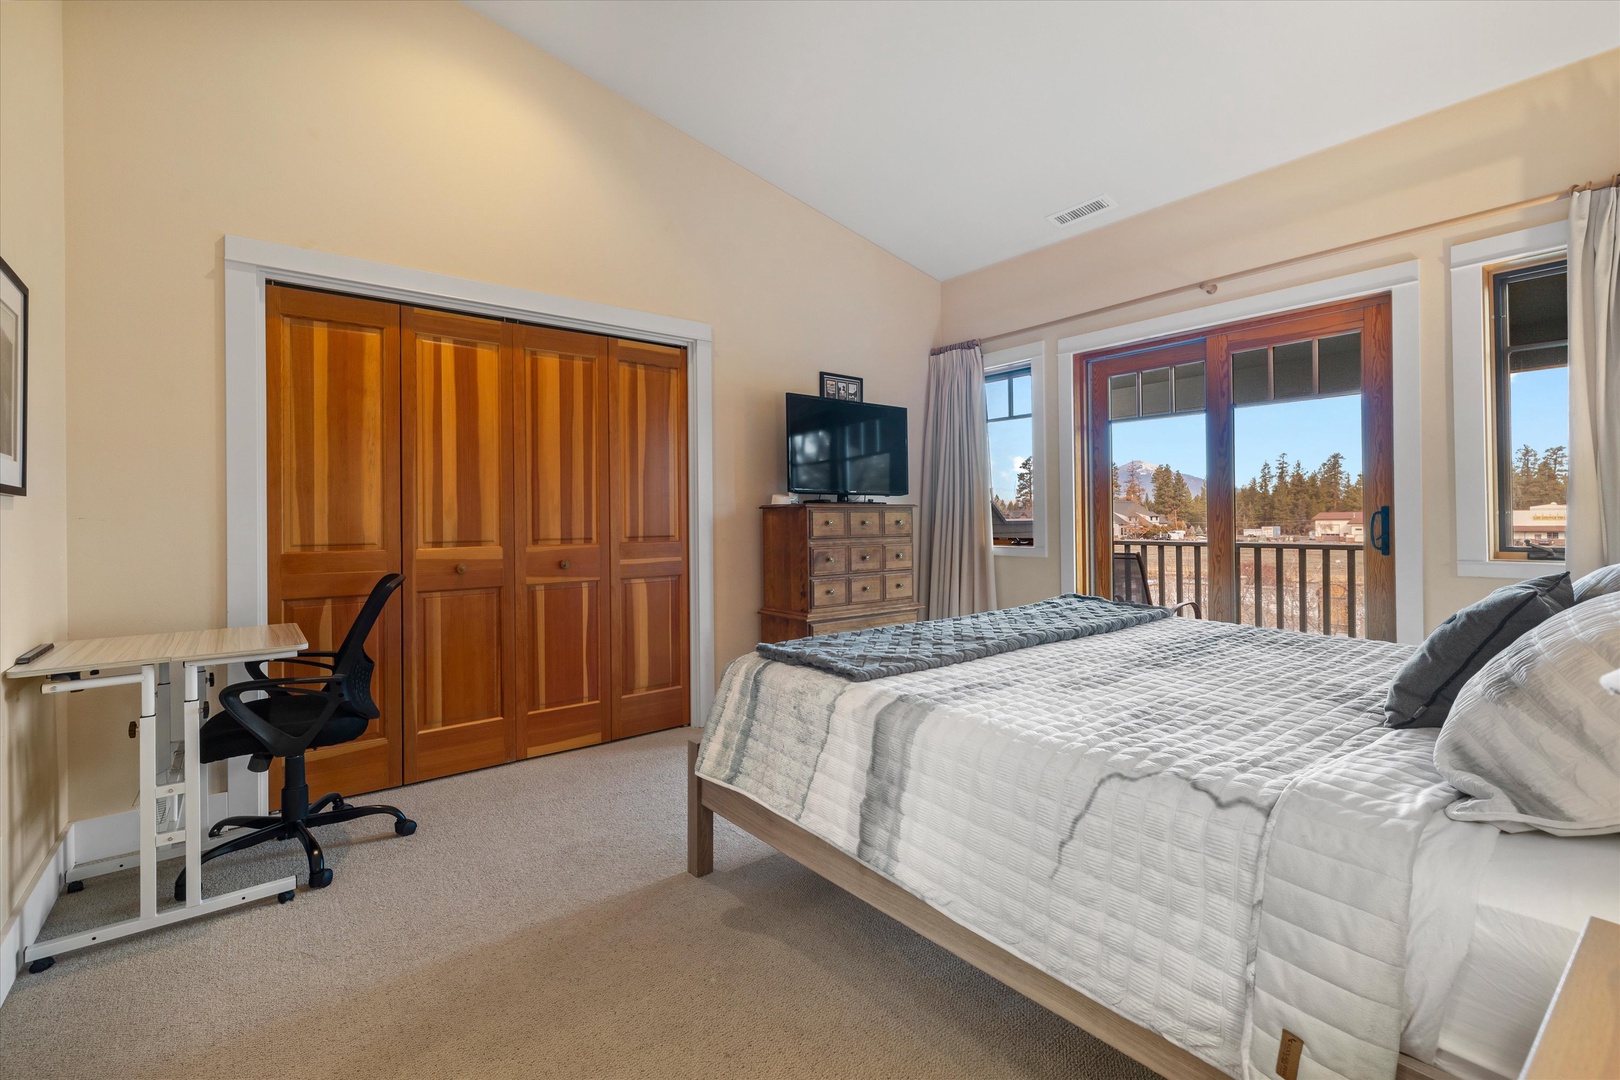 The spacious king suite boasts a private ensuite, TV, & desk workspace